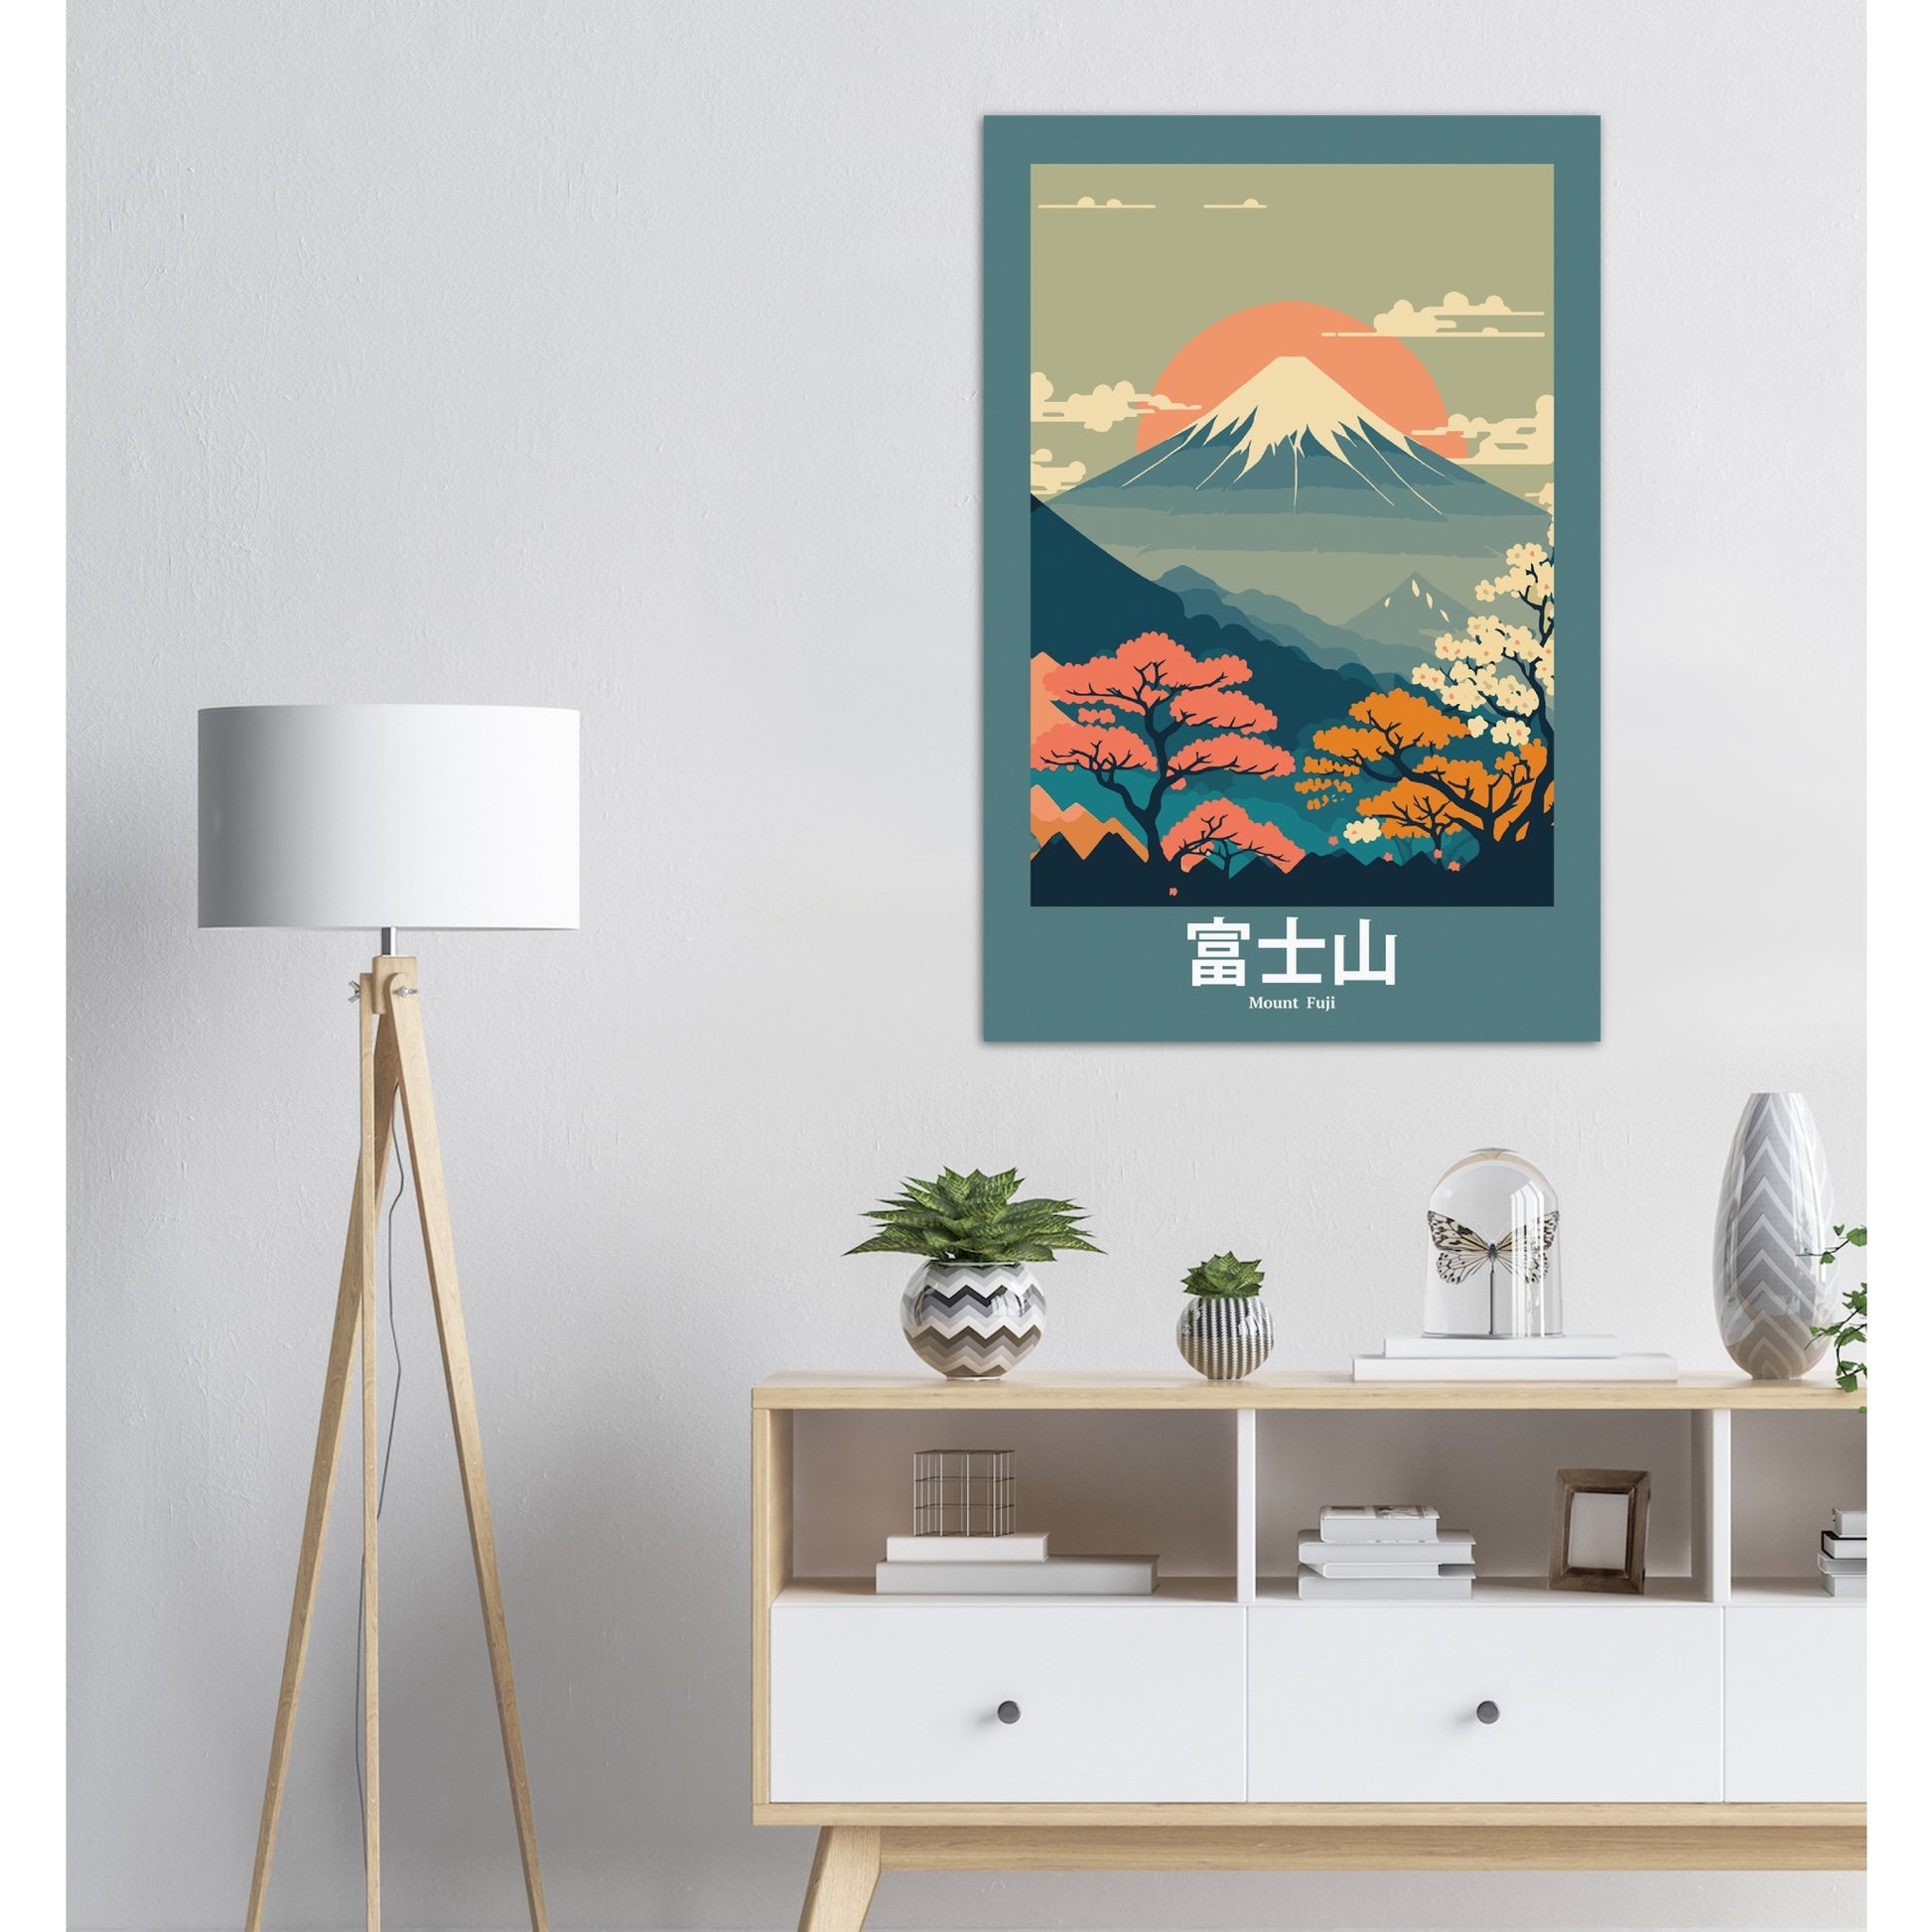 Abstract - – Mount Japan Fuji Posters Poster Republic